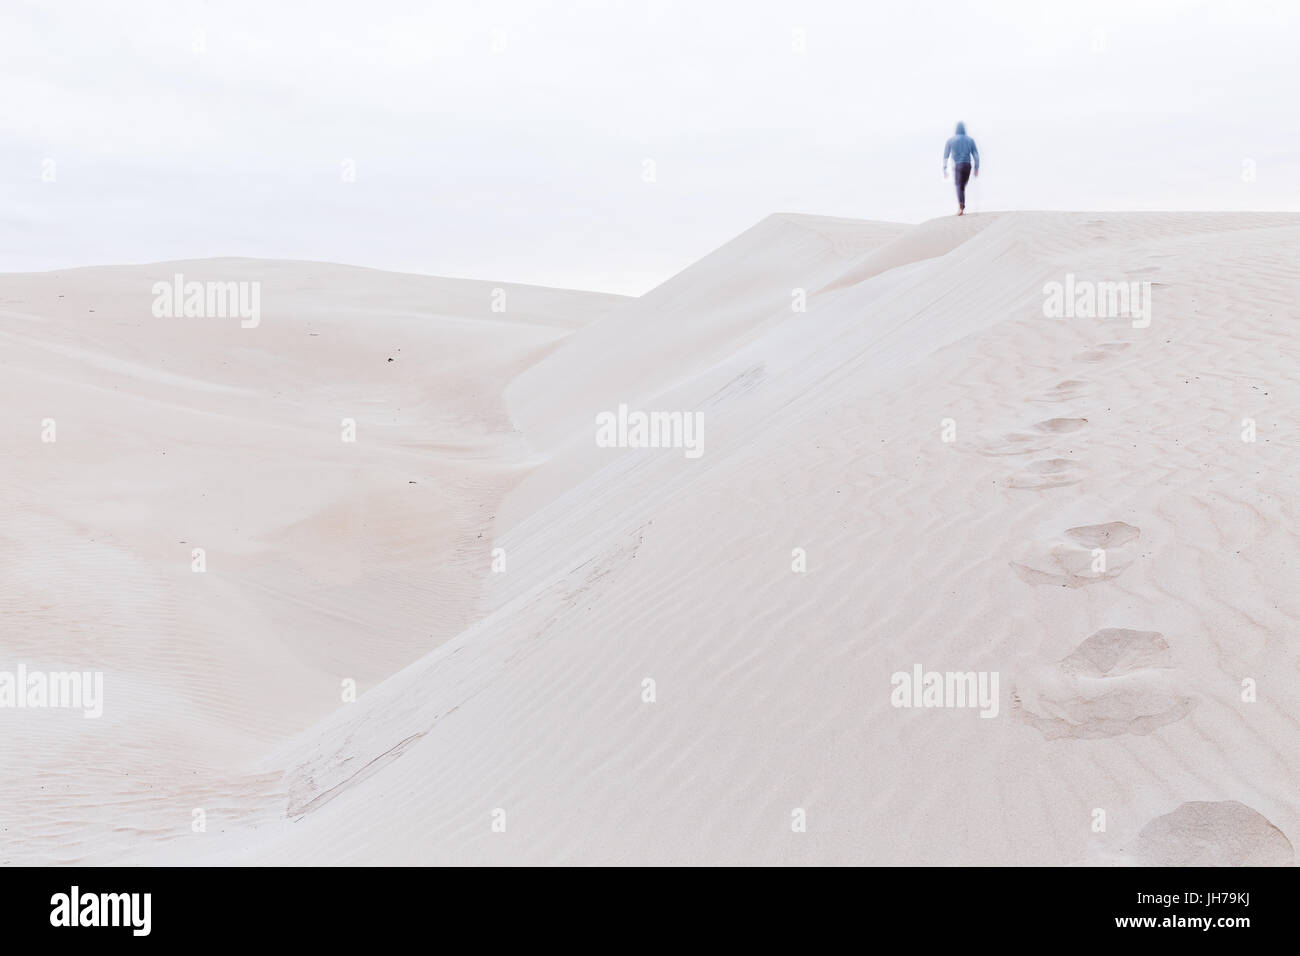 A person walks along a sand dune ridge leaving behind a trail of footprints in the sand. Stock Photo